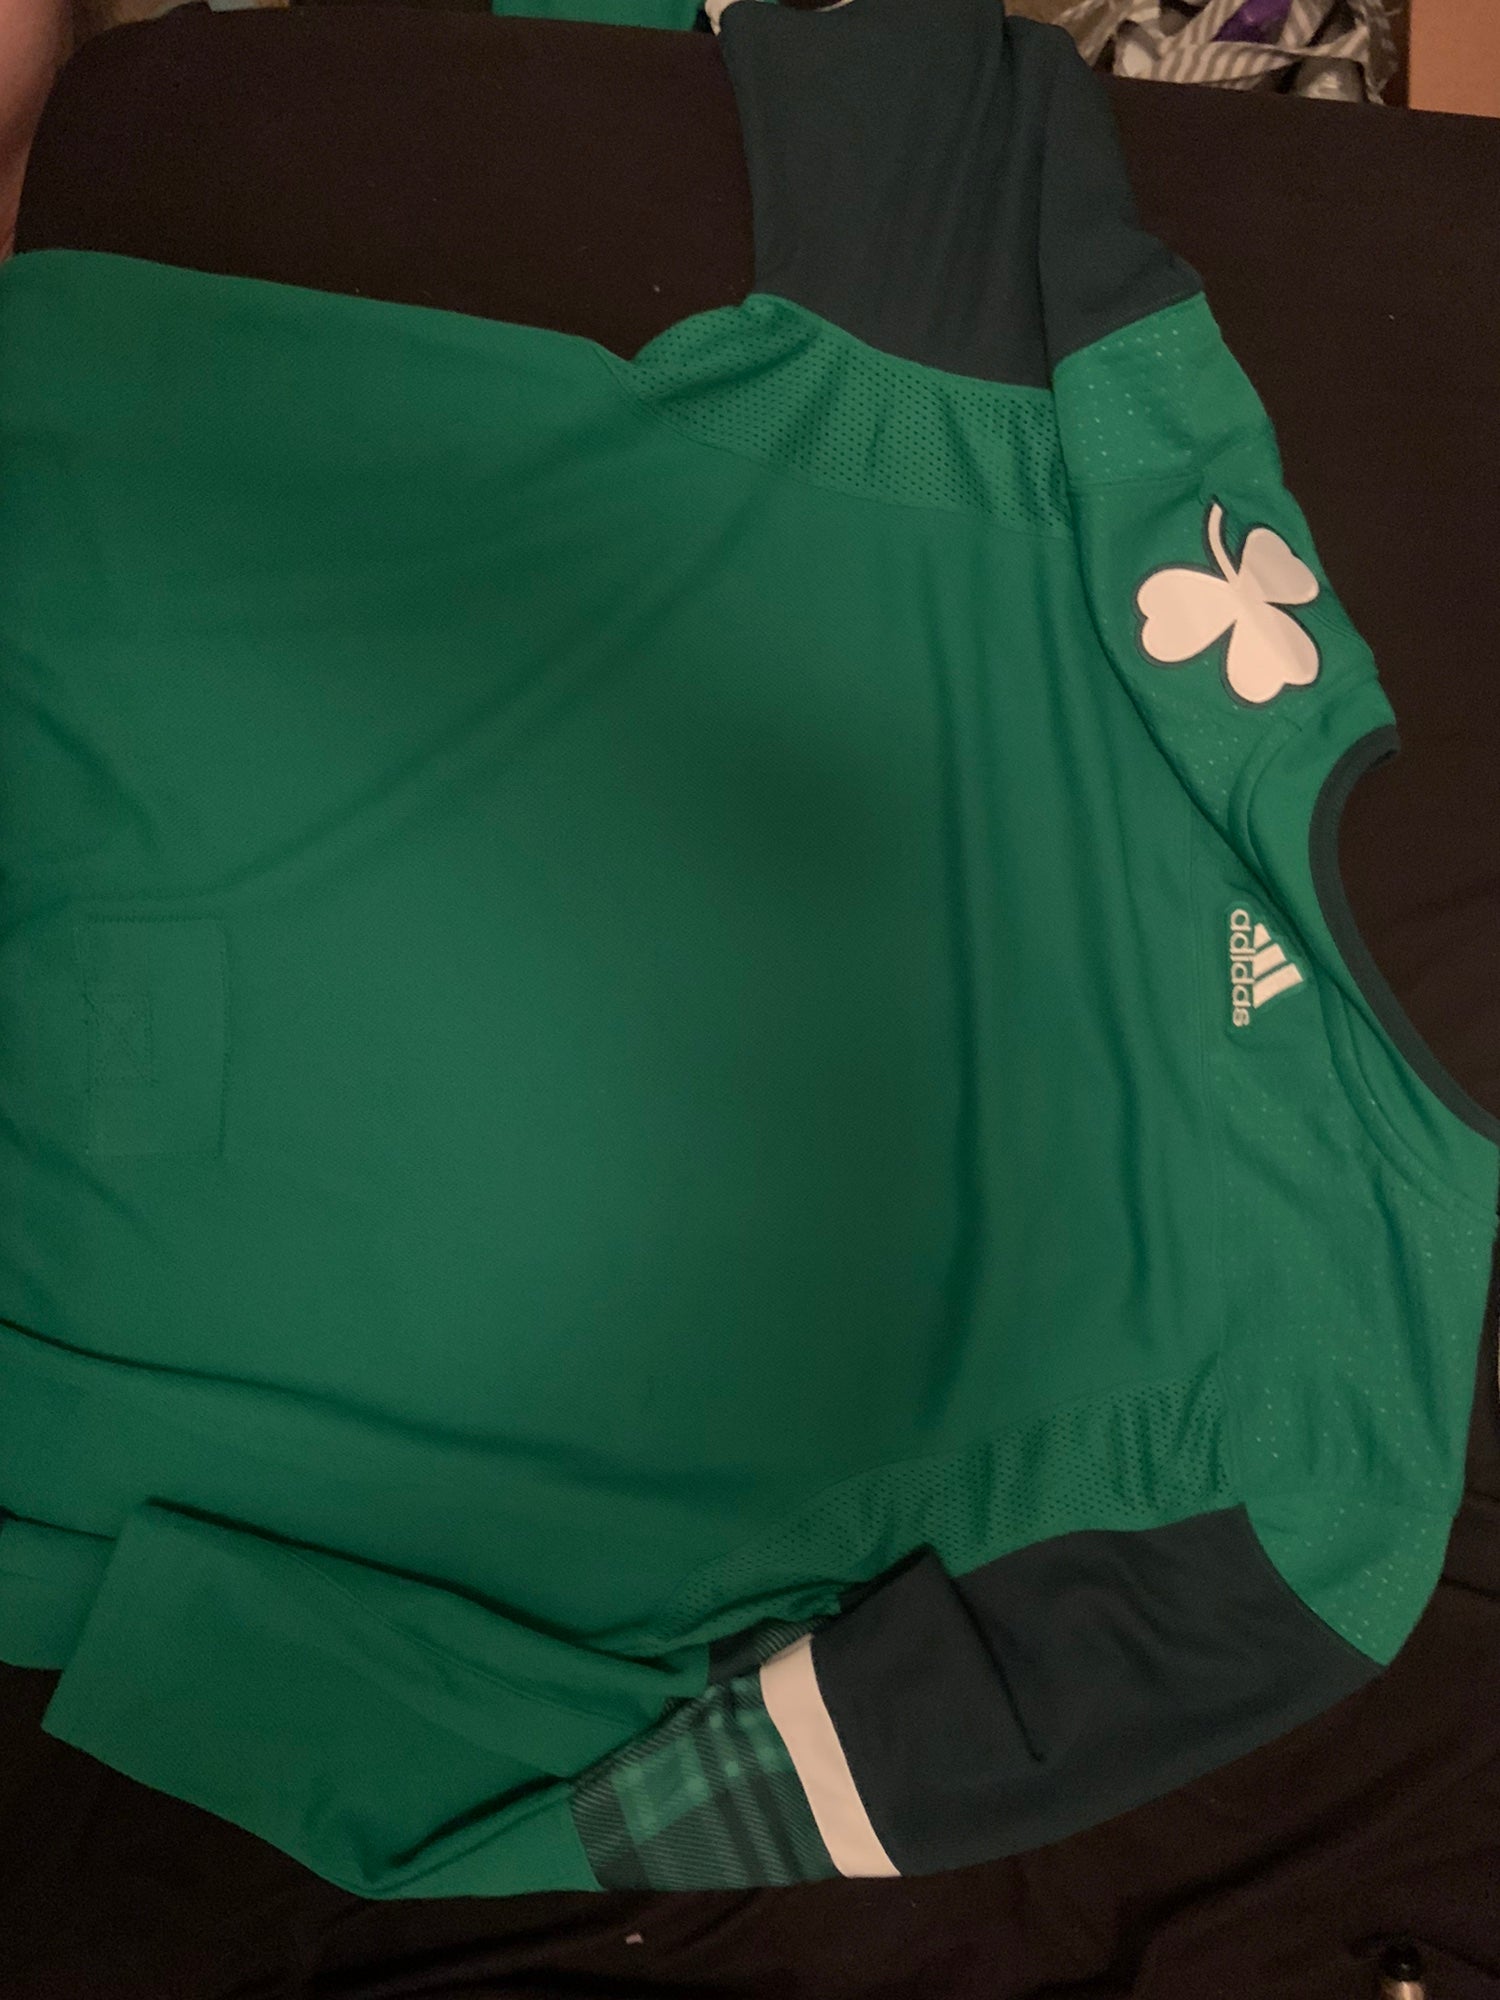 These St. Patrick's Day jerseys are - Vegas Golden Knights